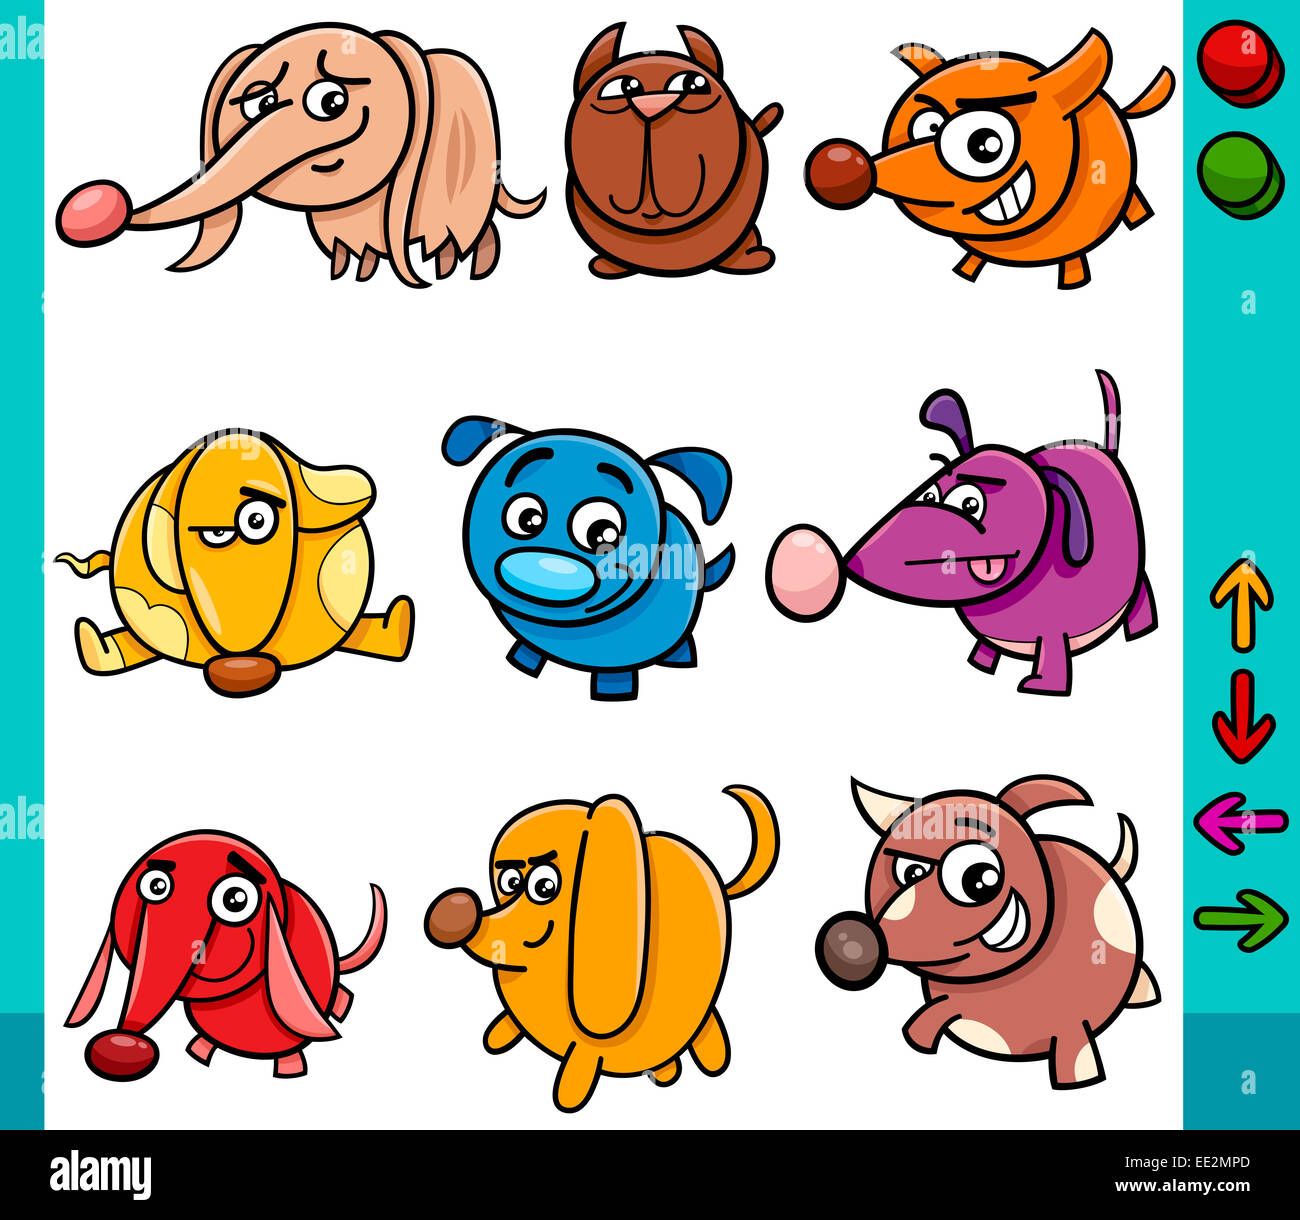 Cartoon Illustration of Funny Dogs Animal Characters with Buttons for  Application or Video Game Stock Photo - Alamy